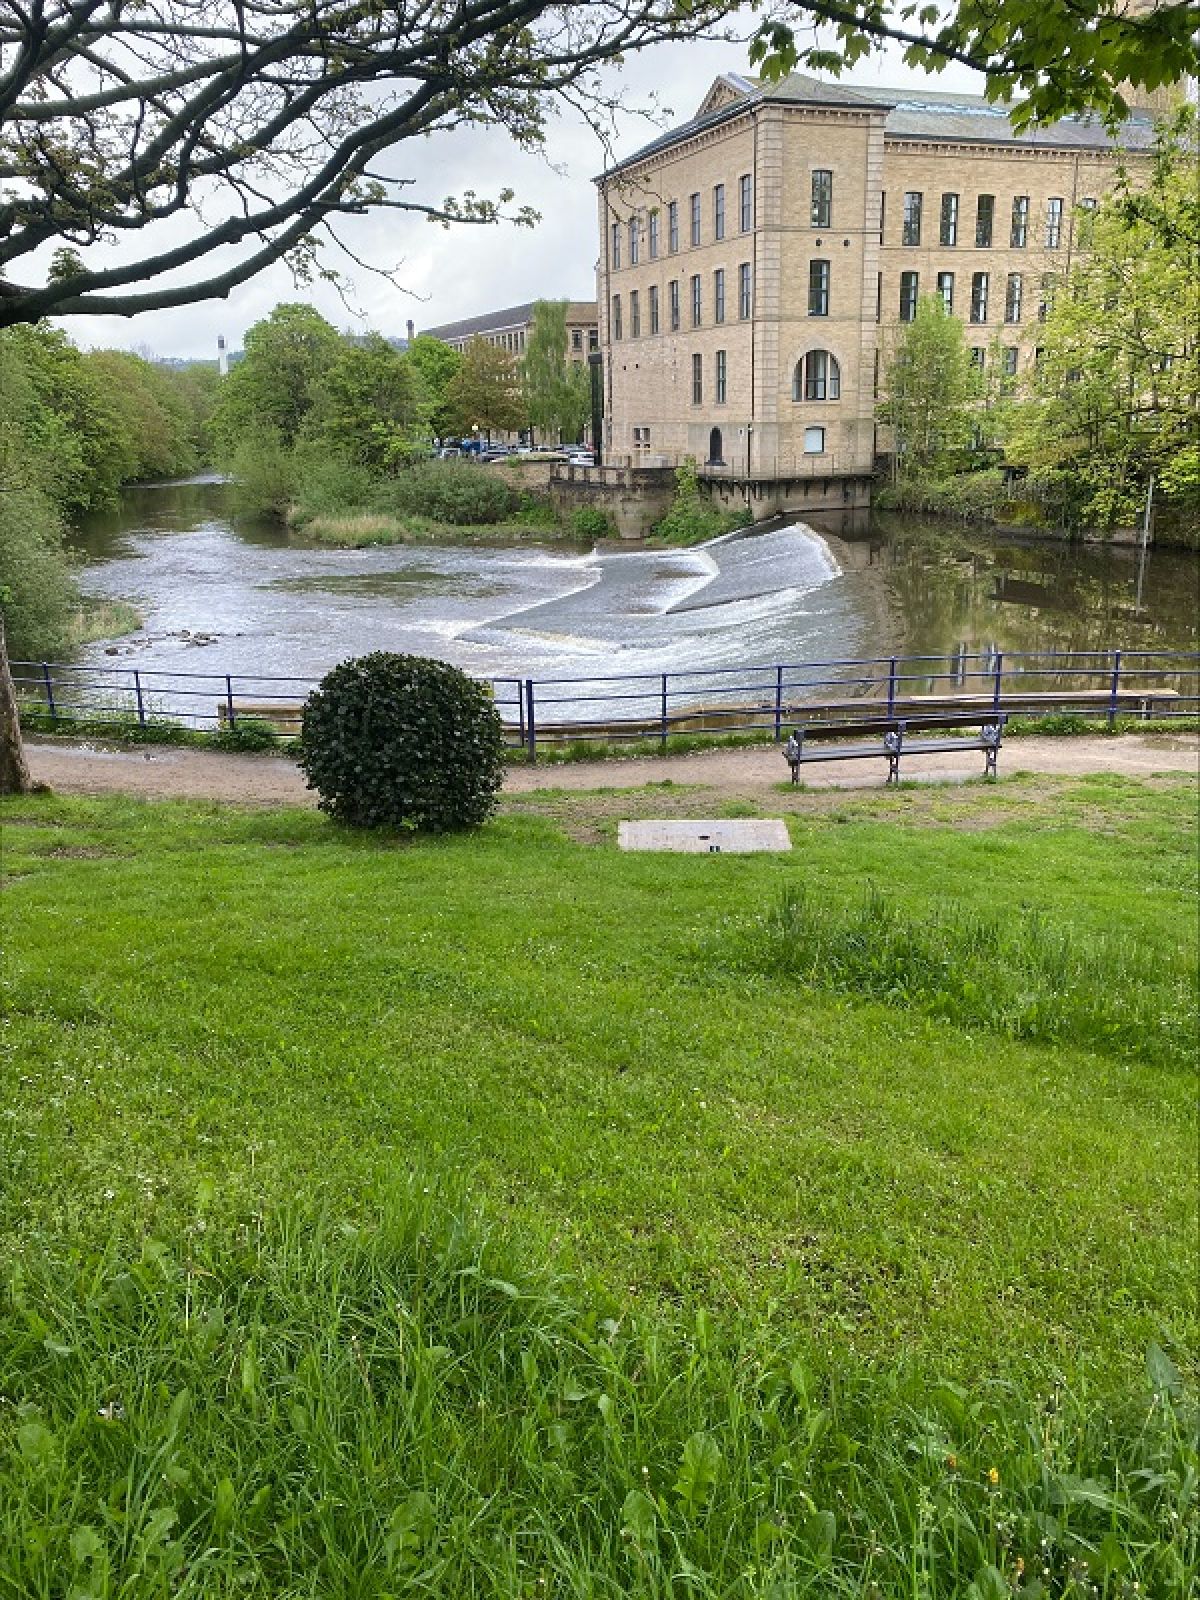 ------Sponsored Walk from Ripon Cathedral to Bradford Cathedral------ Raises £2,100 - Walking by the River Aire in Saltaire